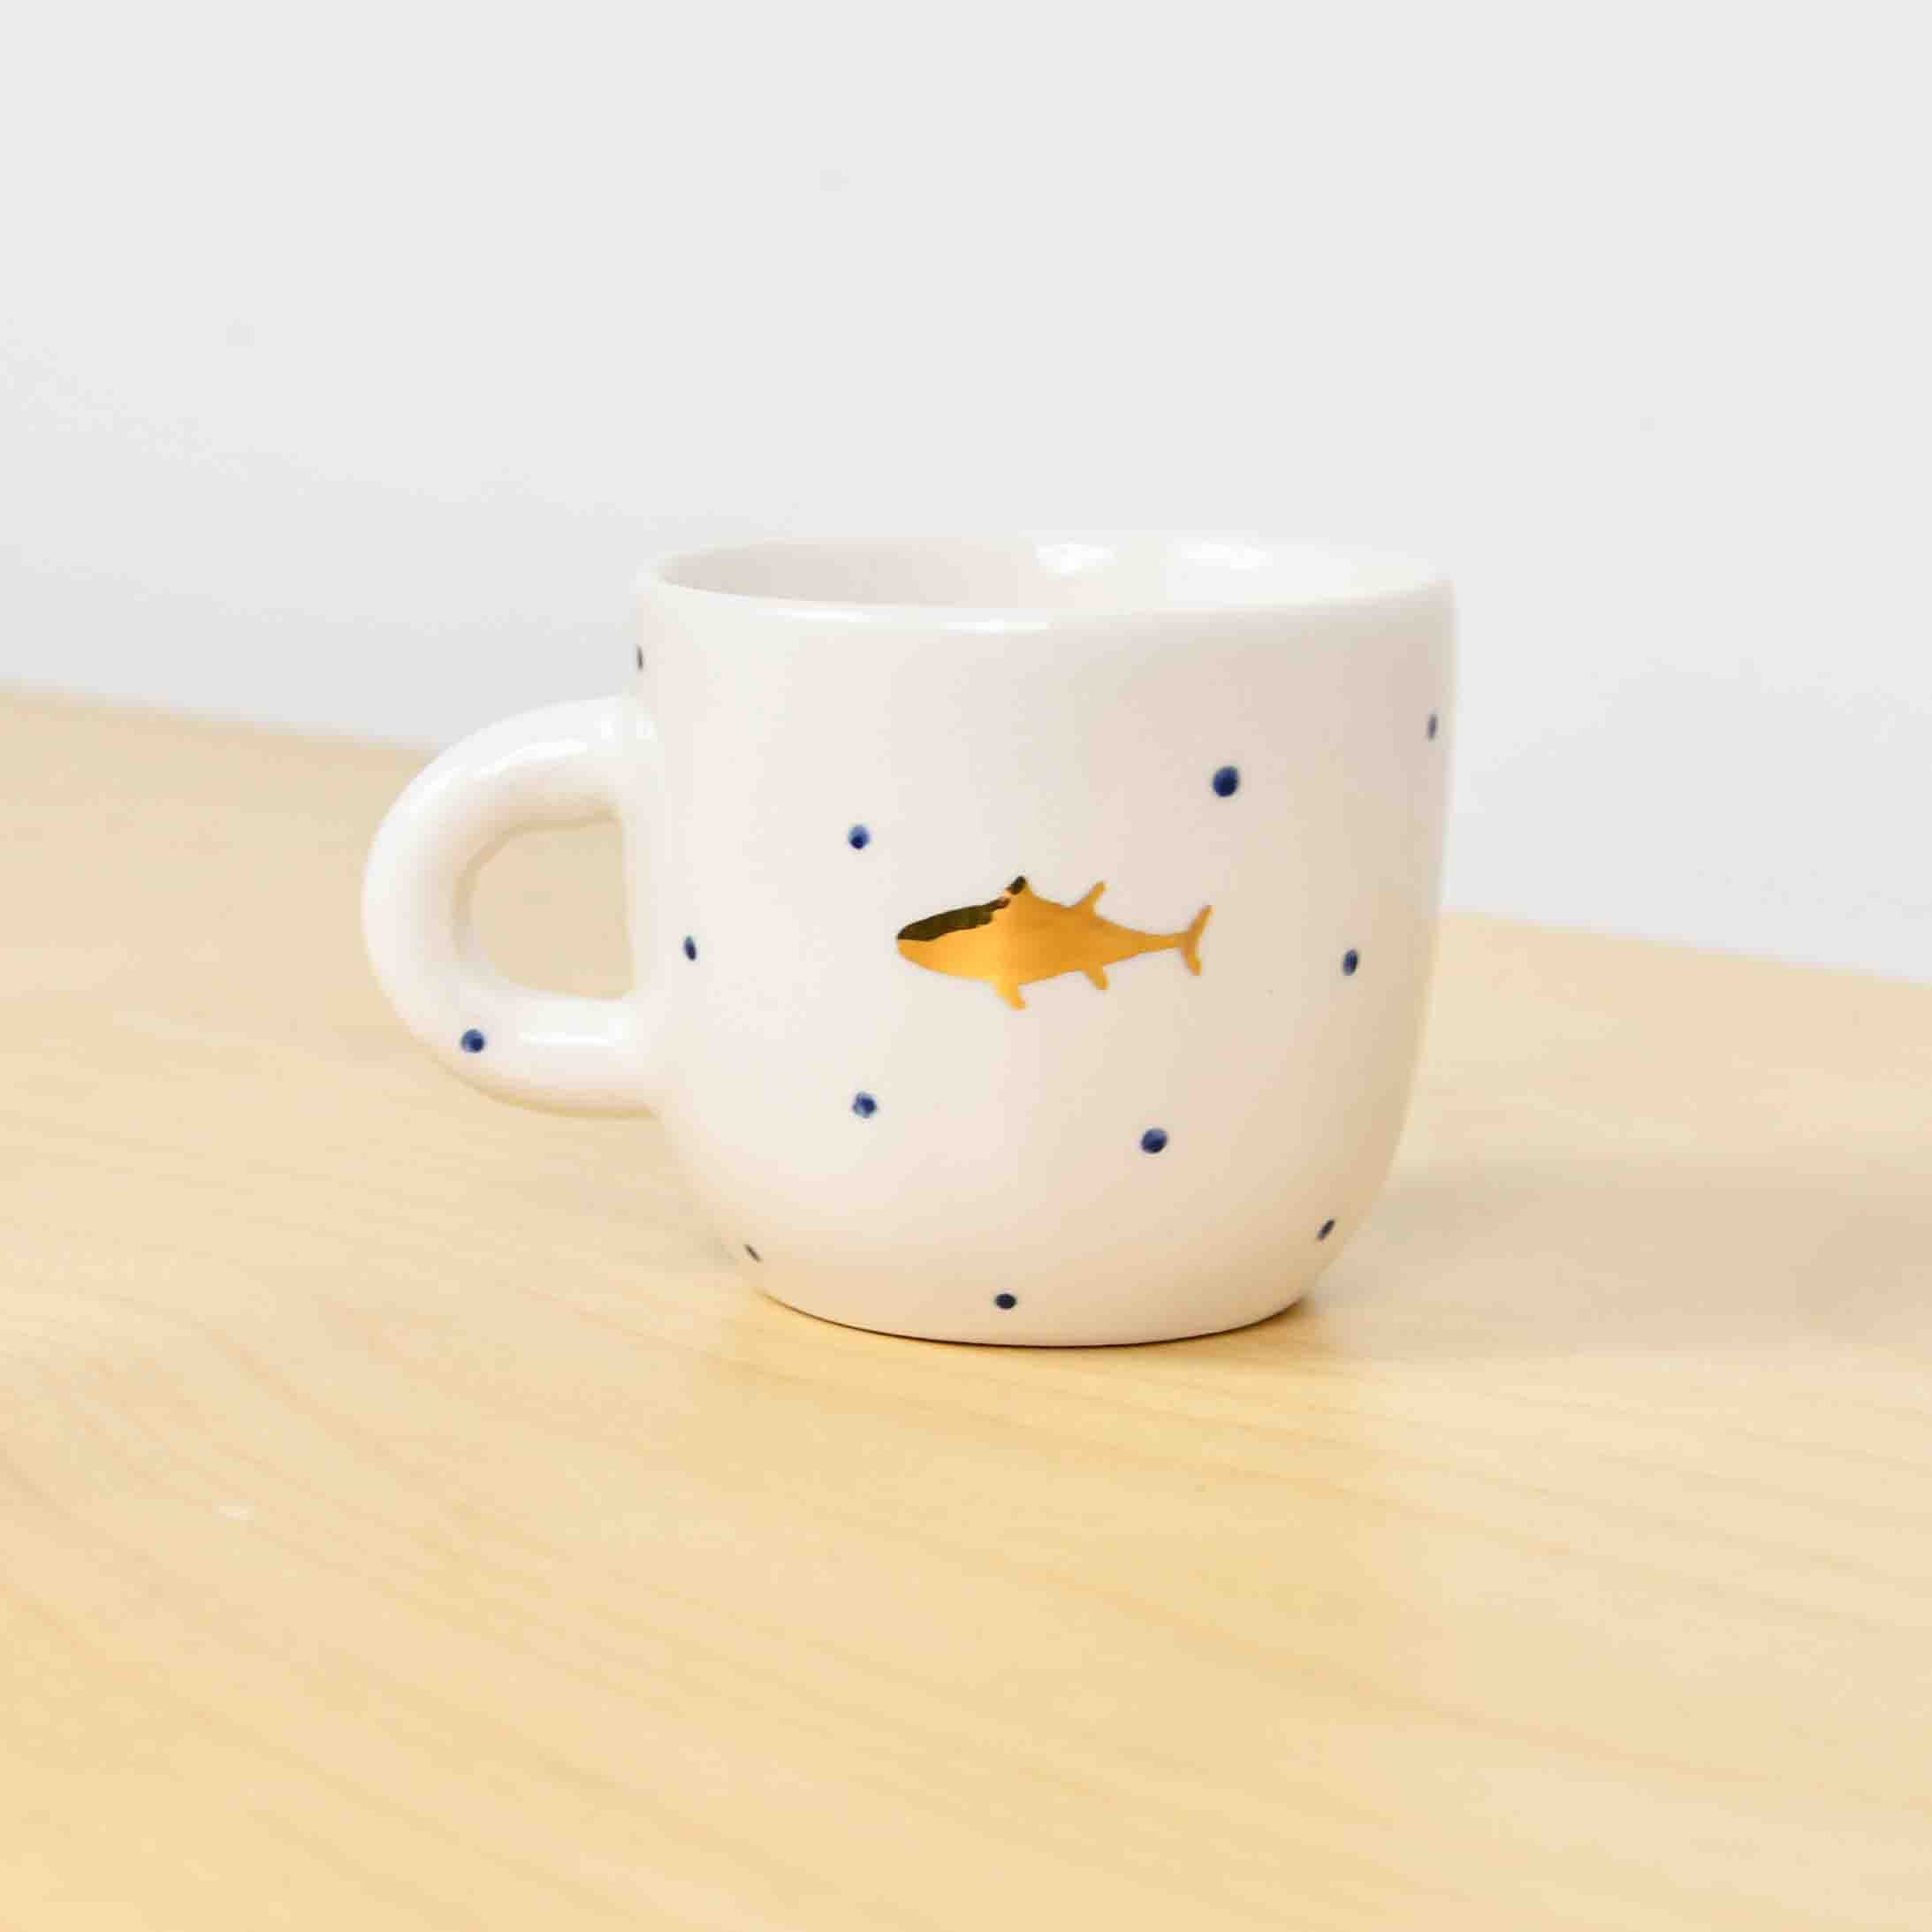 Coffee cup with handle